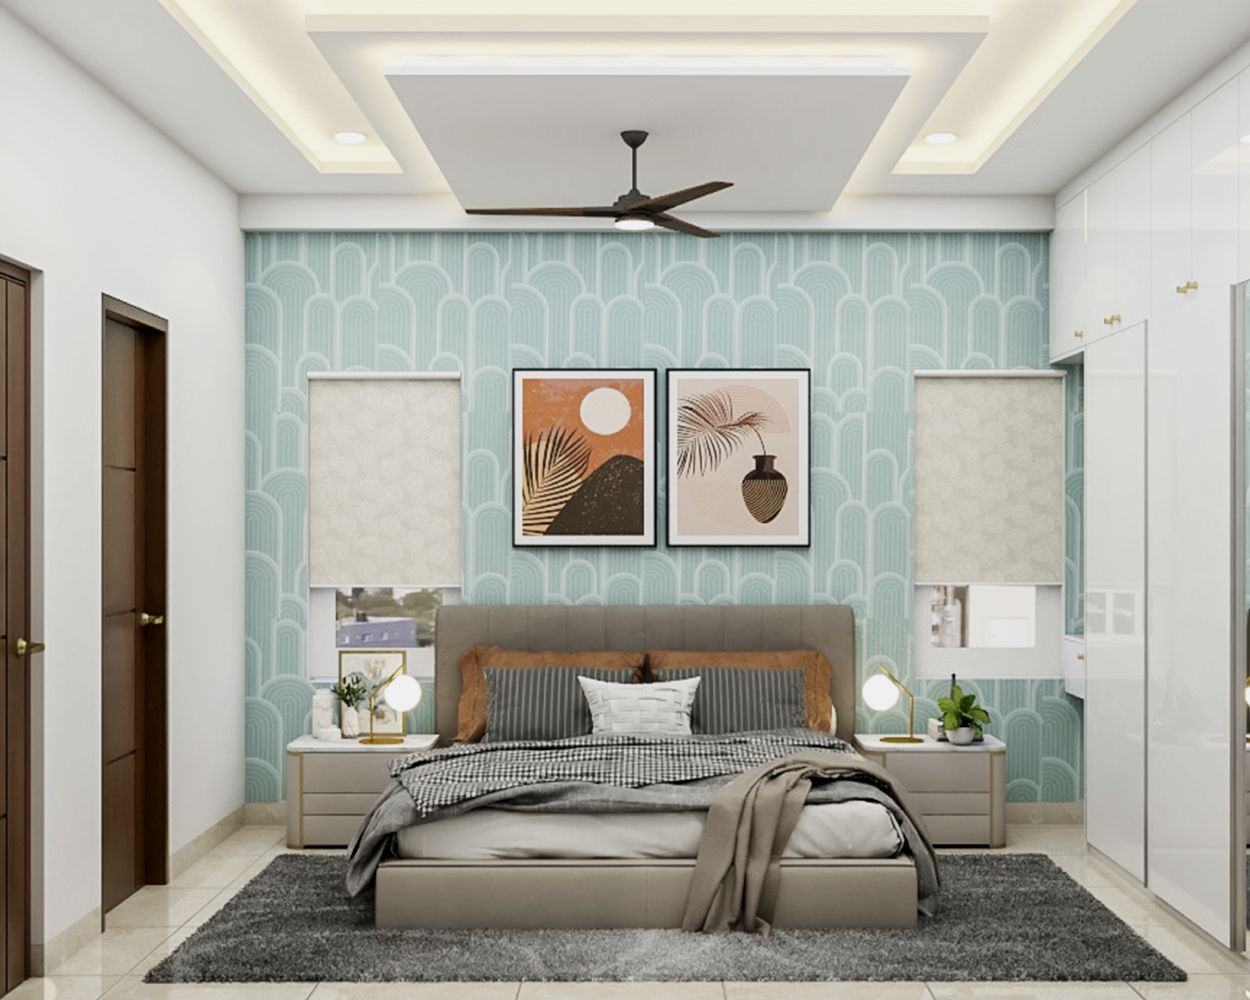 Modern Gypsum Double-Layered Tray Bedroom Ceiling Design With Recessed Lights